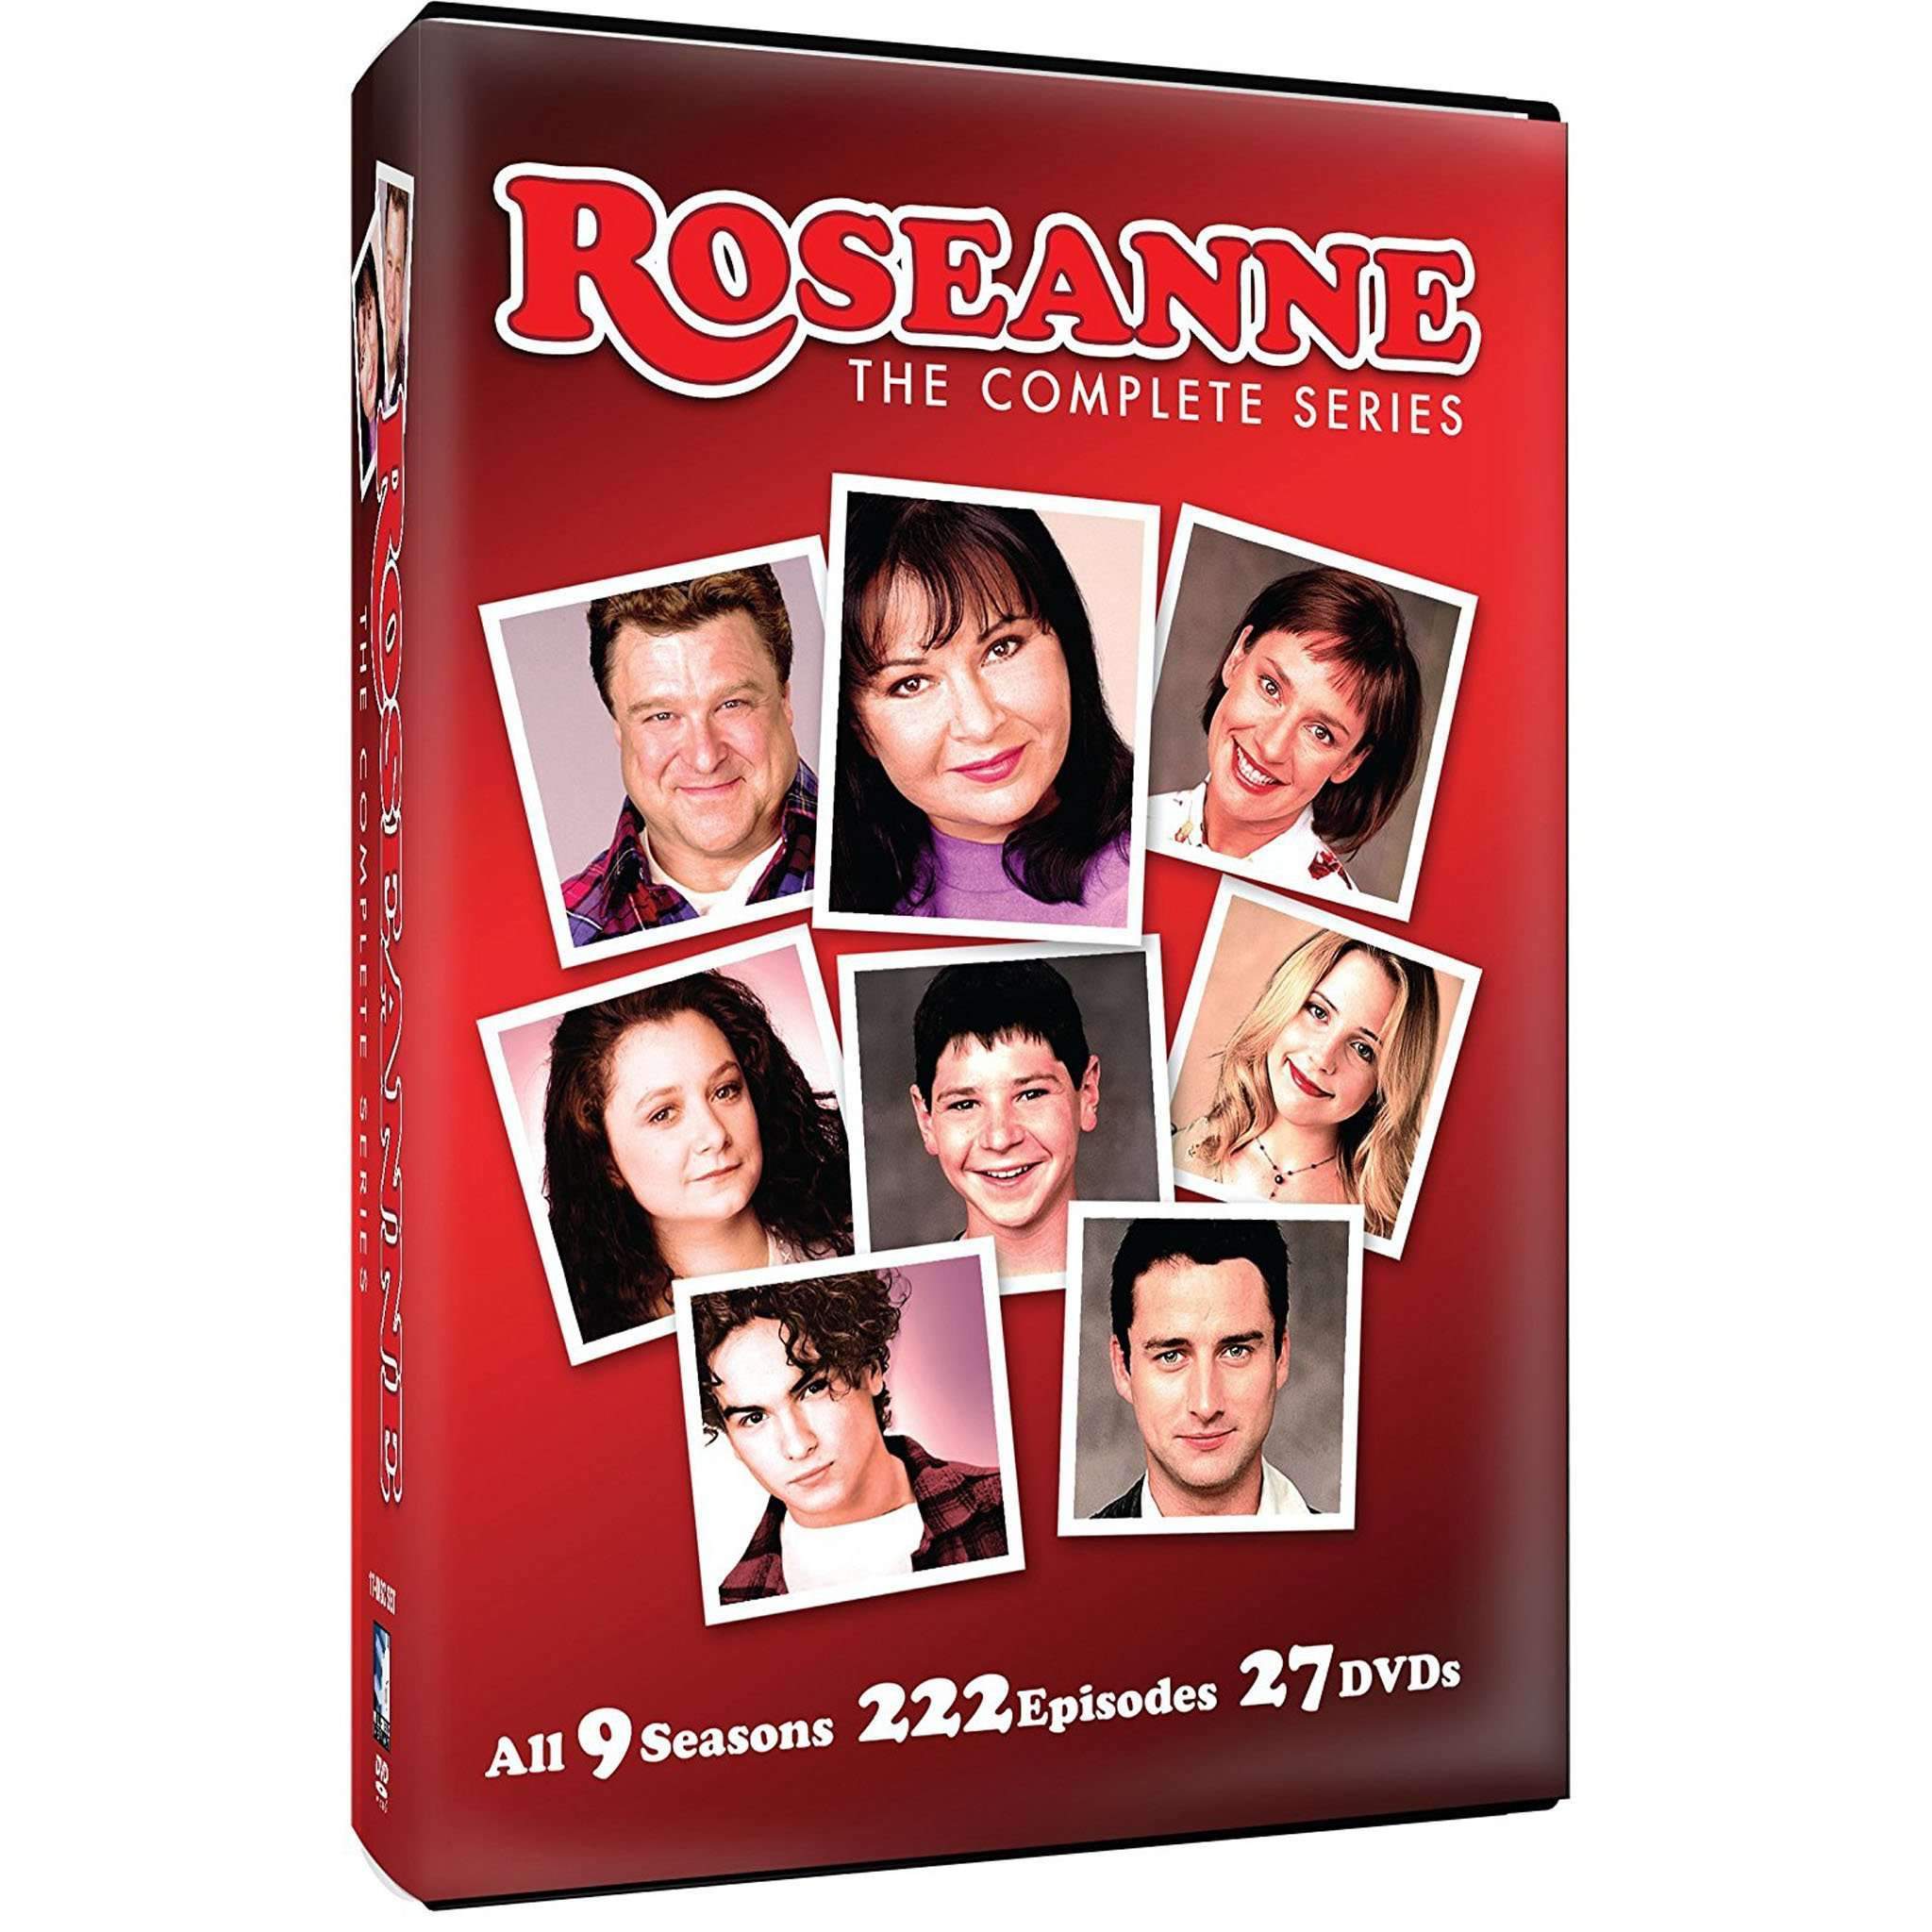 Roseanne DVD Complete Series Box Set Mill Creek Entertainment DVDs & Blu-ray Discs > DVDs > Box Sets